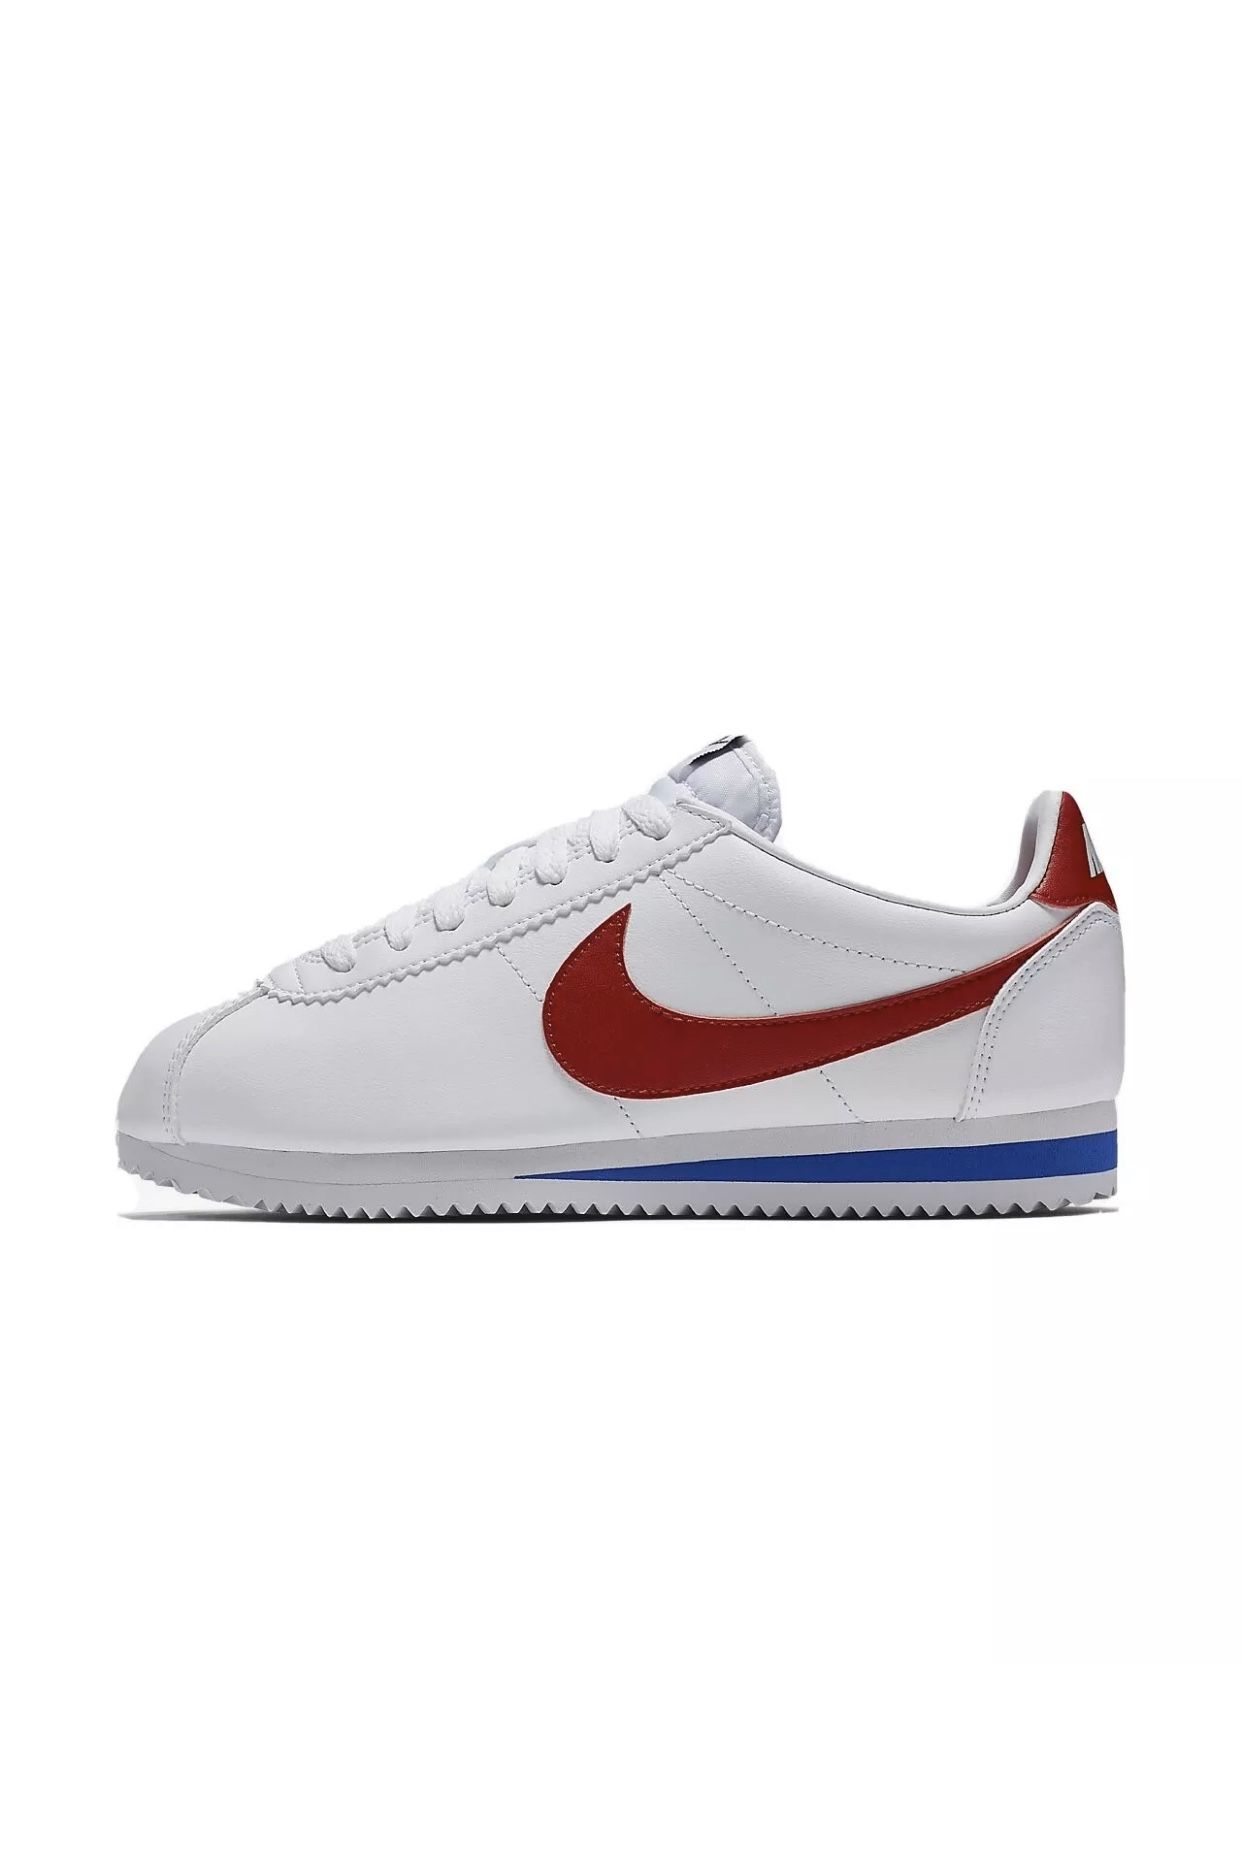 100% Authentic Guaranteed Brand New With No Box. Nike Classic Cortez OG Leather "Forrest Gump" White & Red & Royal Blue Womens Shoes Sz 5.5 NEW 8074